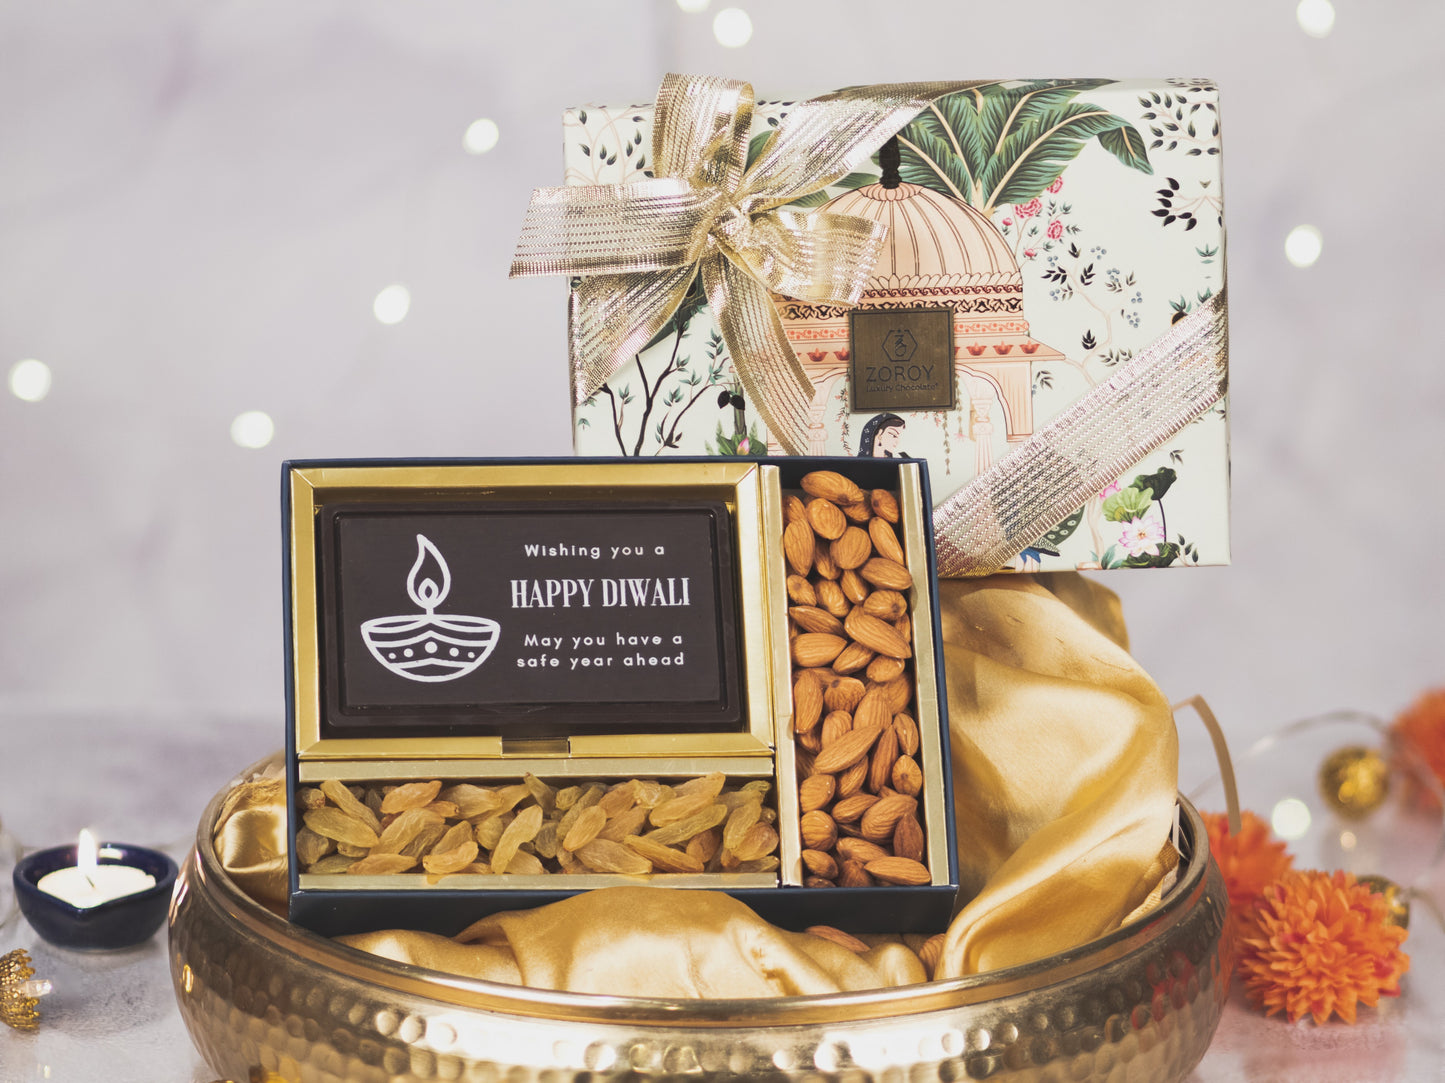 ZOROY Small Celebration Box with chocolate bar and dry fruits